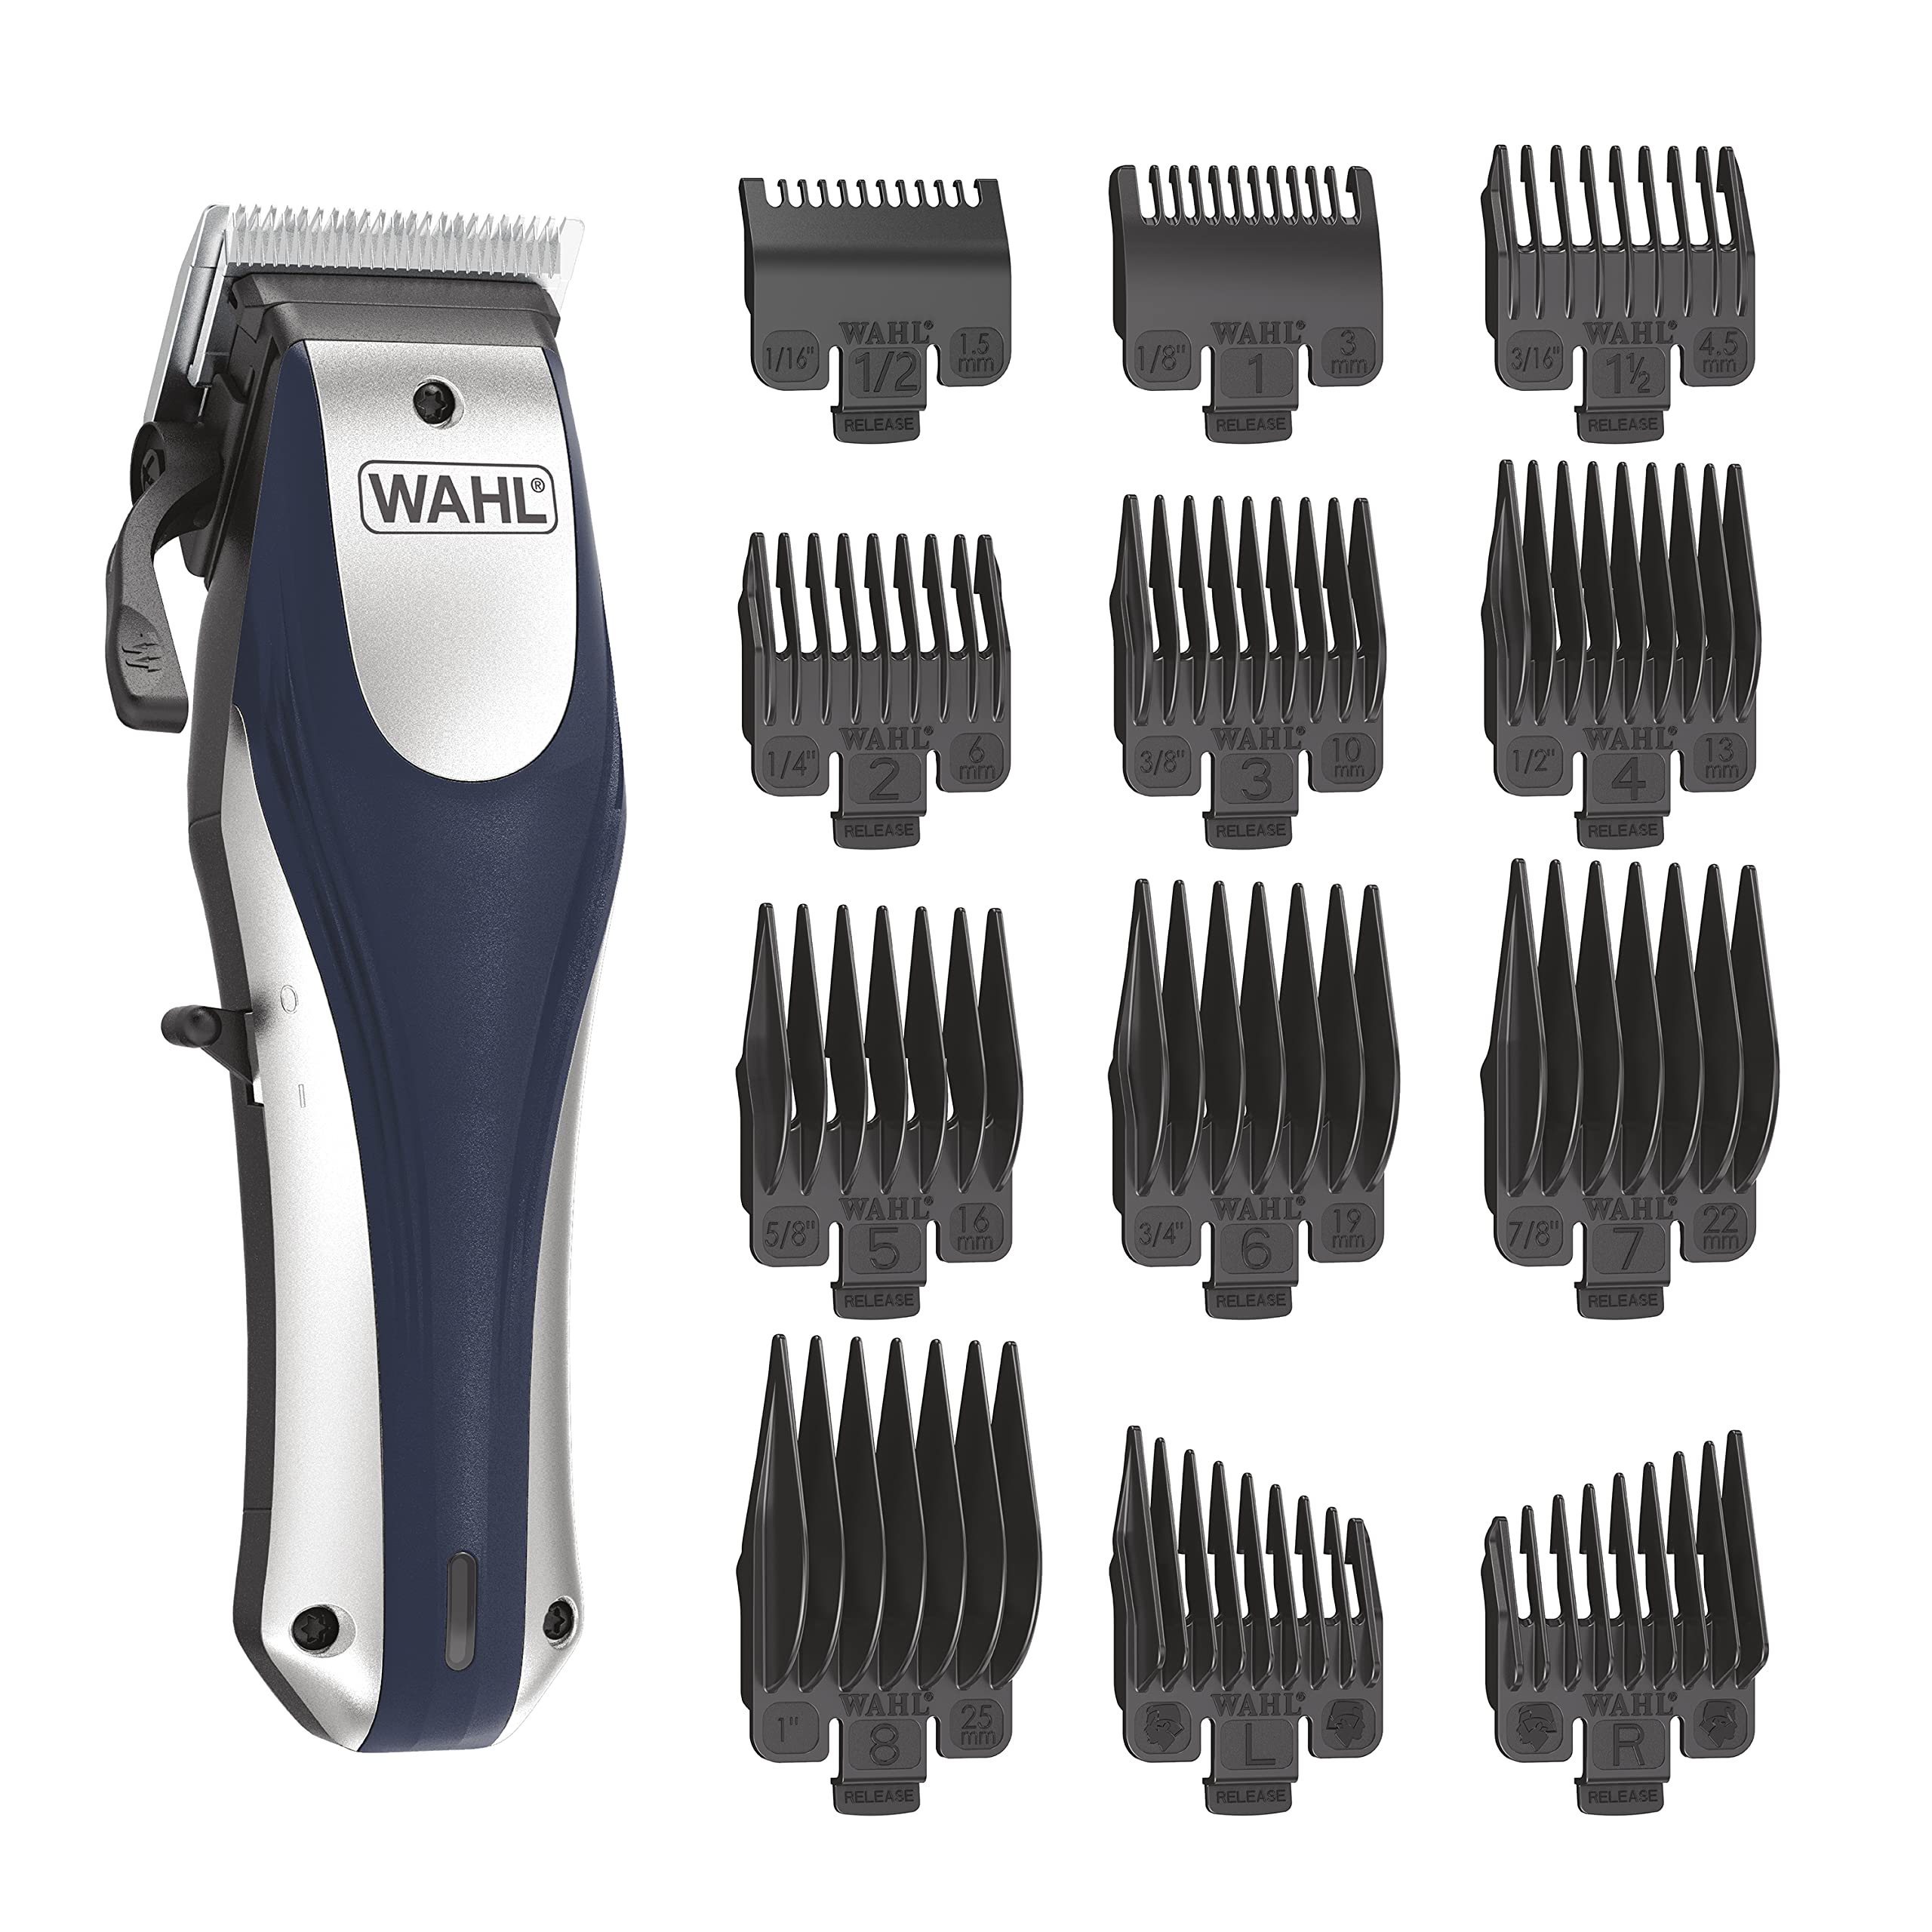 Wahl Lithium Ion Pro Rechargeable Cord/Cordless Hair Clippers for Men, Woman, & Children with Smart Charge Technology for Conven